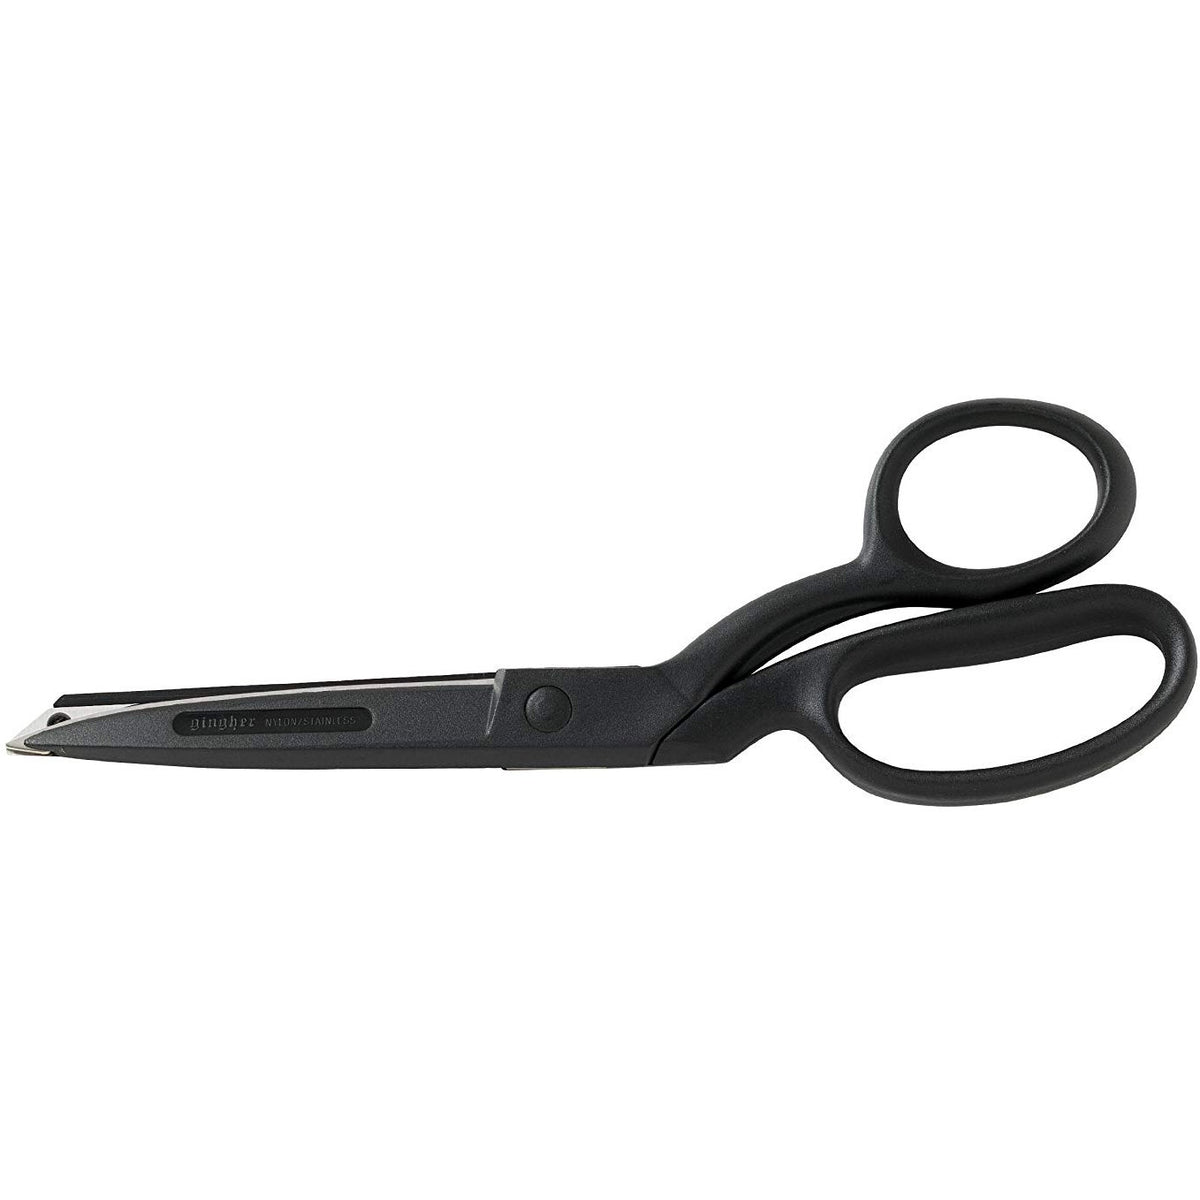 Gingher 8 Featherweight Bent Trimmers